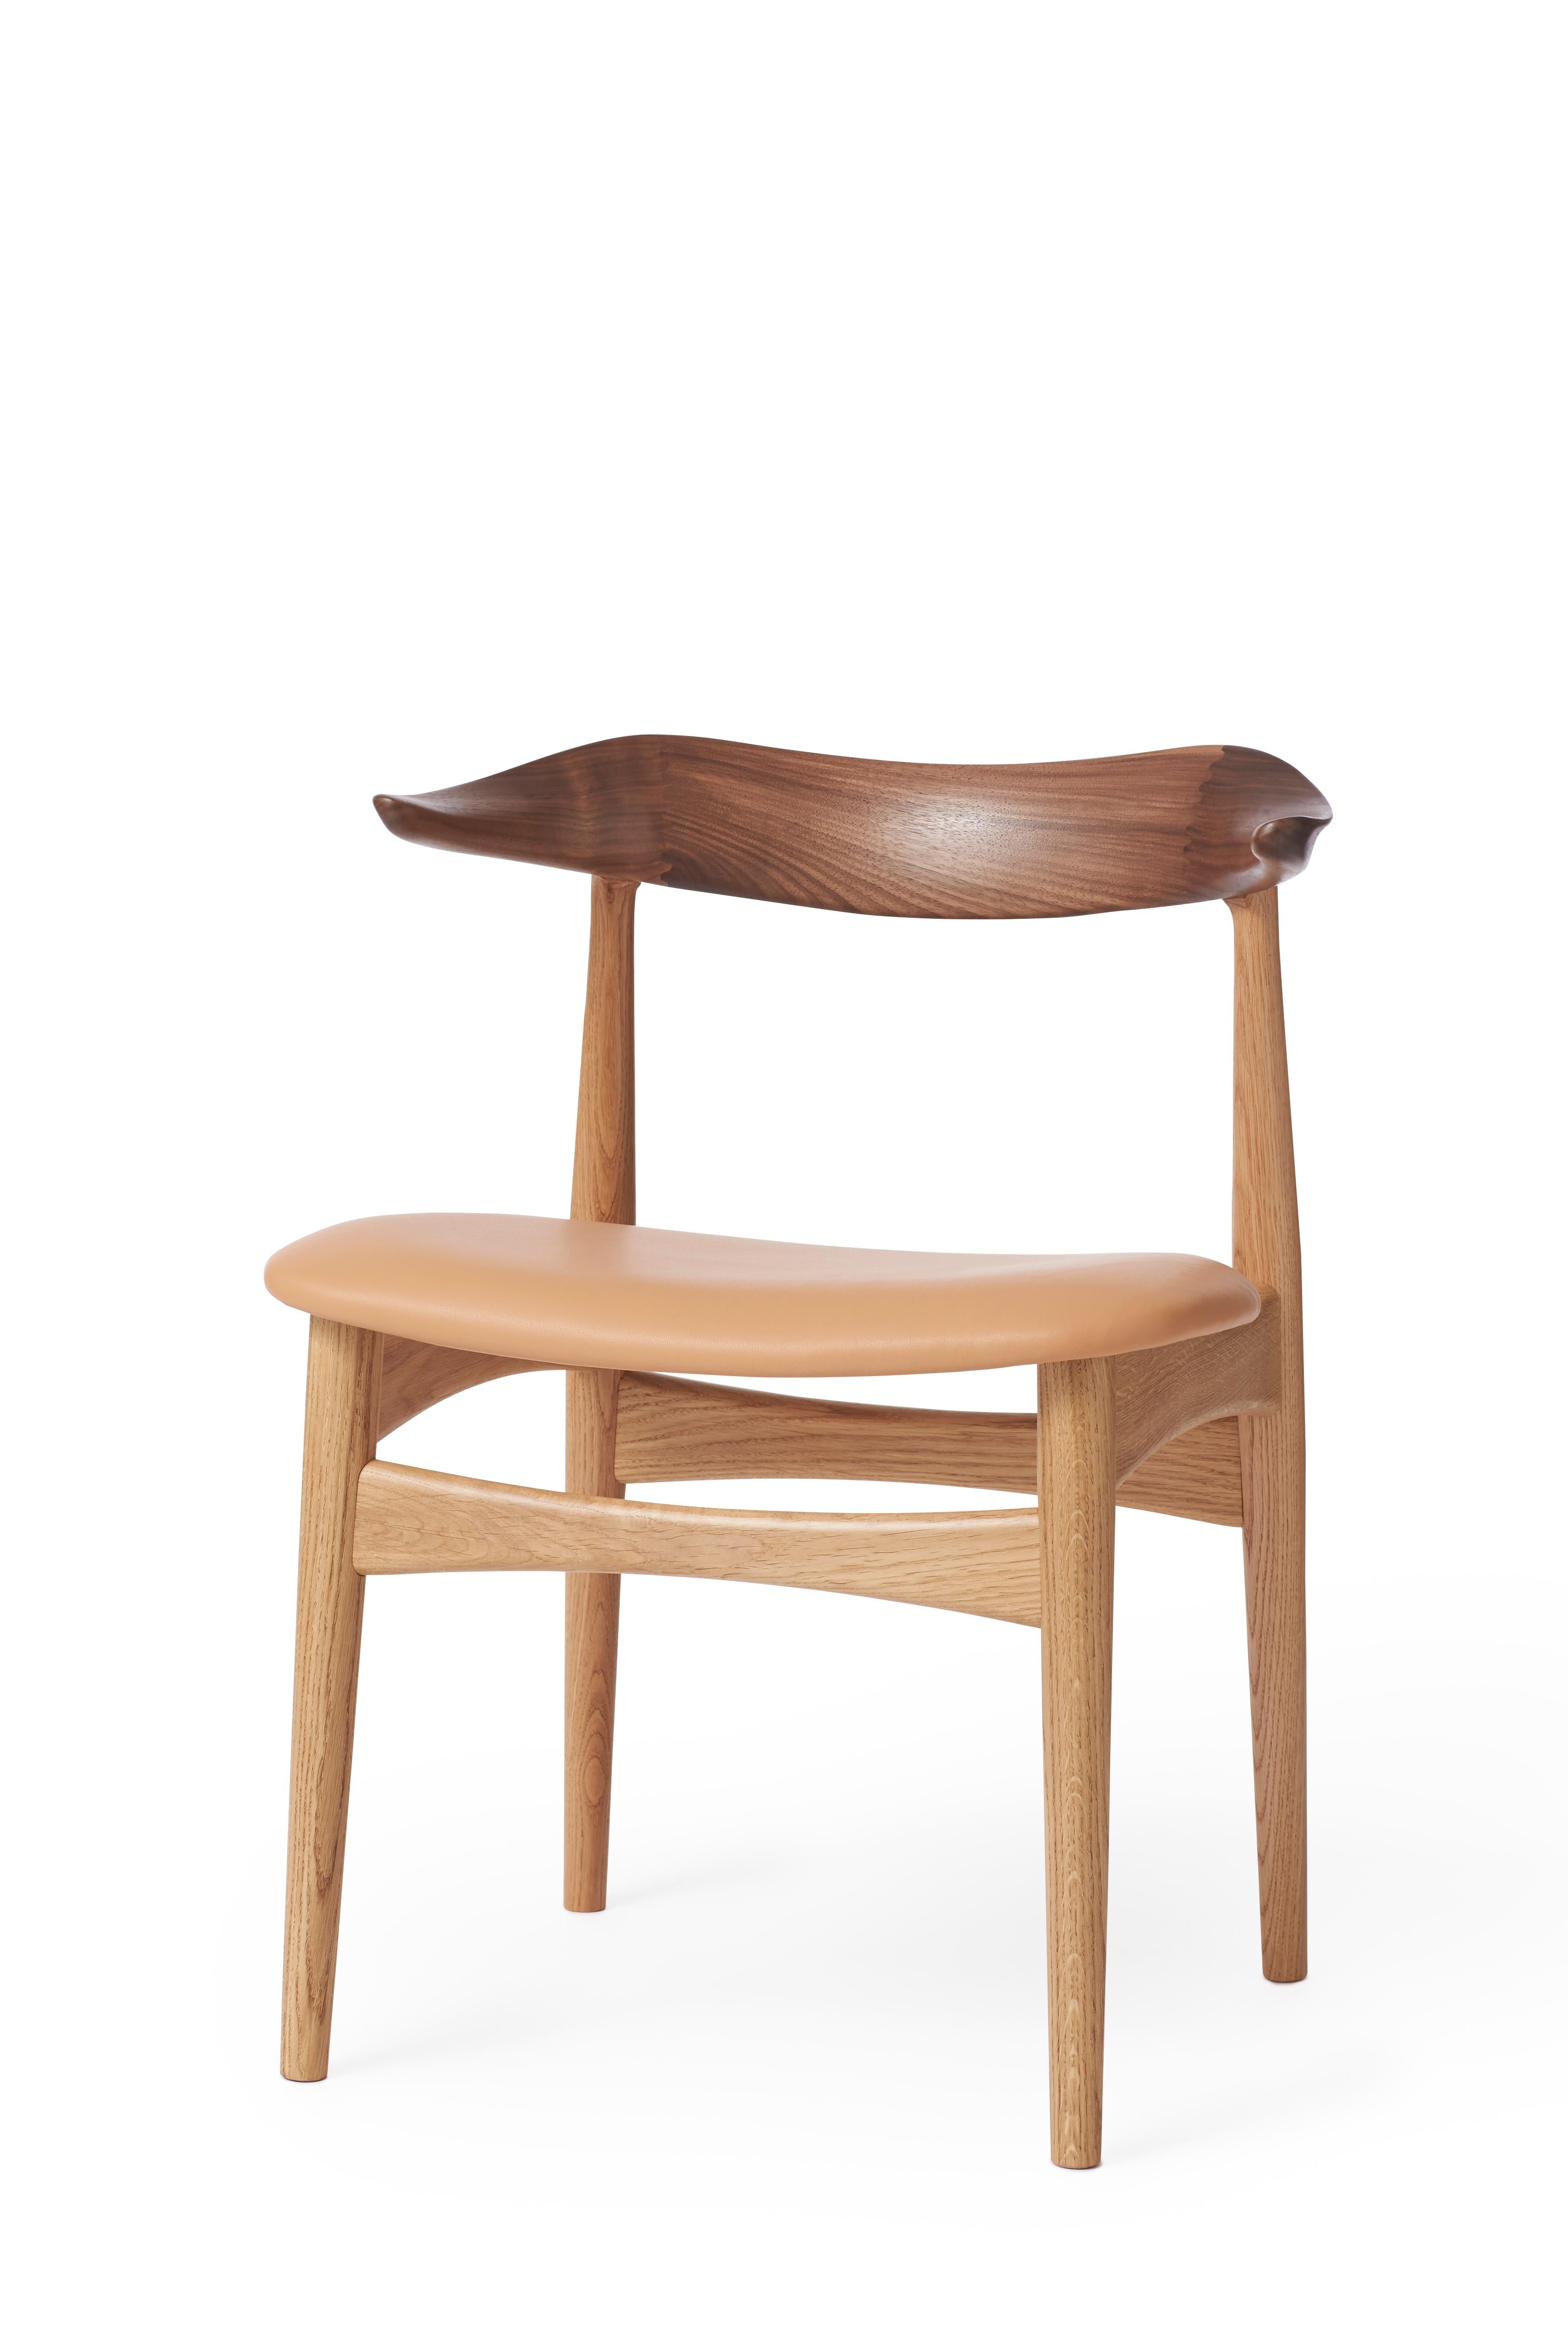 For Sale: Pink (Soavé) Cow Horn Mixed Wood Chair, by Knud Færch from Warm Nordic 2